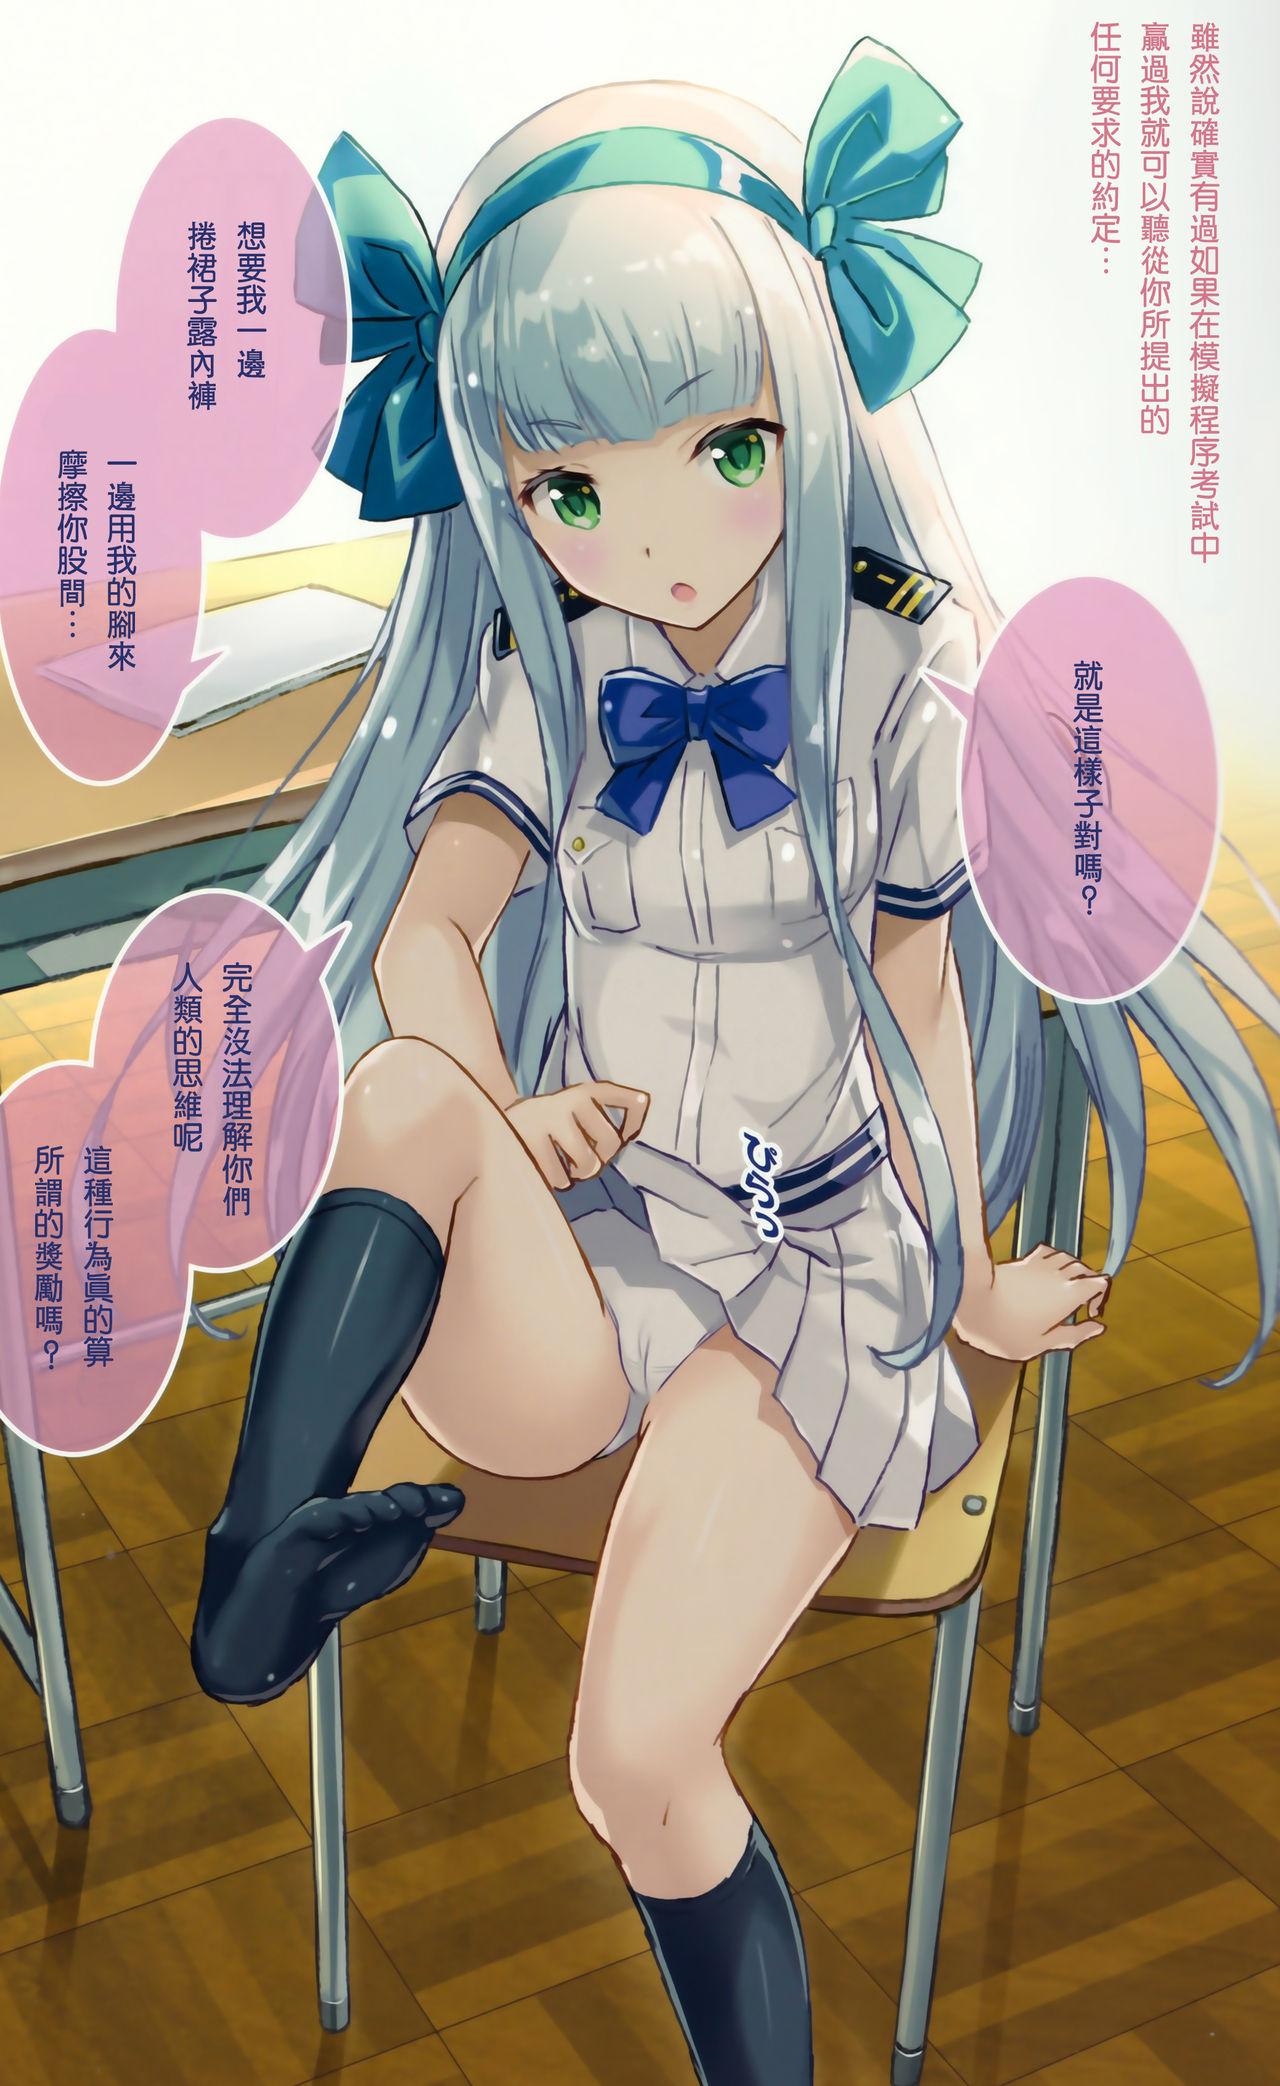 Blowjob TAKAO OF BLUE STEEL 06 - Arpeggio of blue steel Joven - Page 7